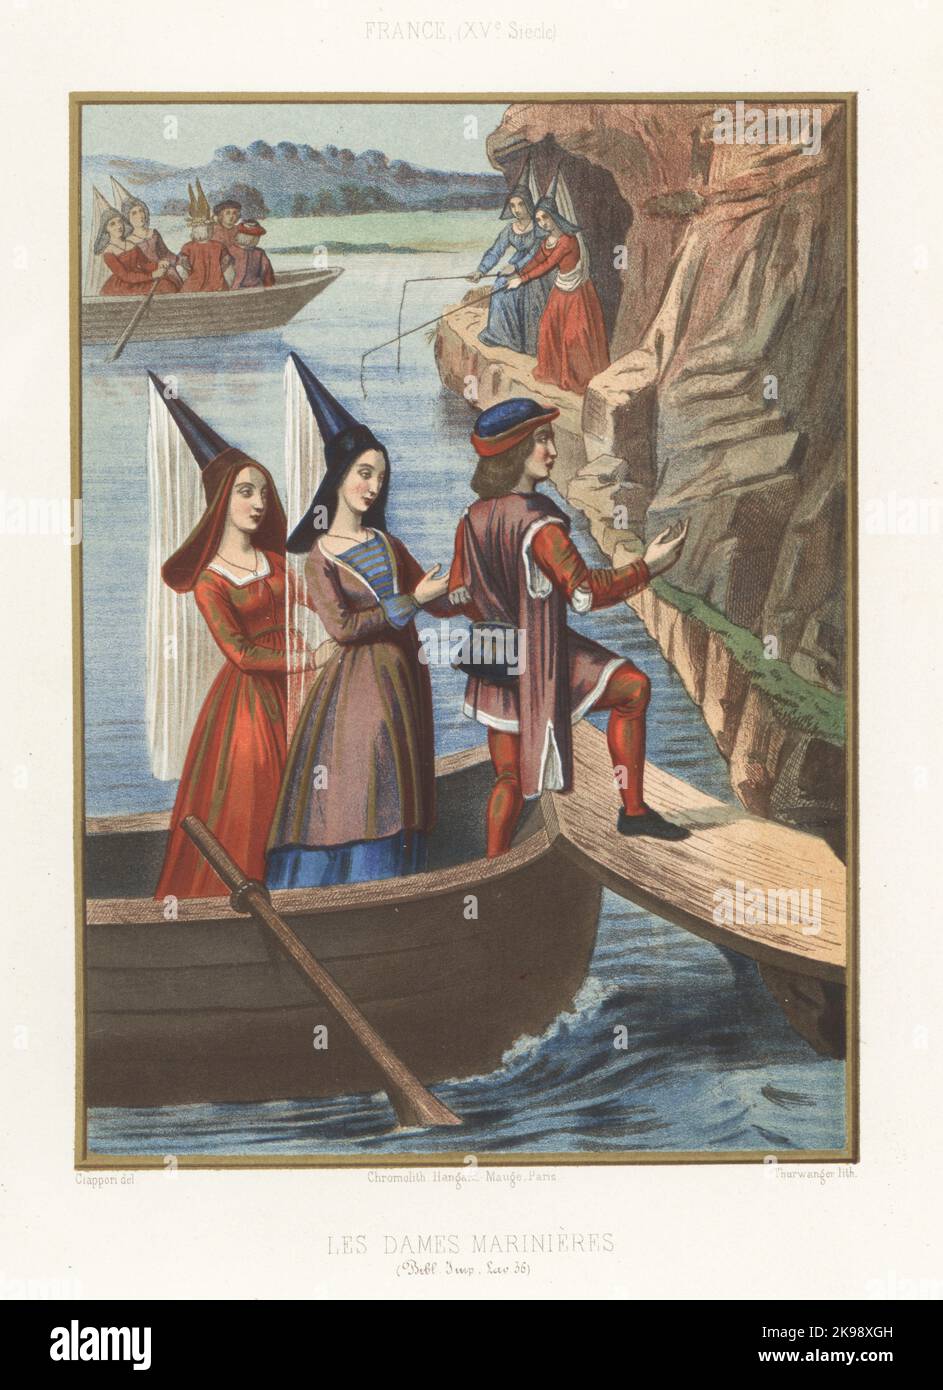 Two ferry women bring Cuer d'Amour to shore, 15th century. Other women in hennin hats row boats and fish. Les Dames Marinieres. France, XVe siecle. From Rene d'Anjou's Roman de tres-douce Mercy au Cuer d'amour epris, 1457, Bibliotheque Imperiale, Fonds de la Valliere MS 36. Chromolithograph by  Thurwanger after an illustration by Claudius Joseph Ciappori from Charles Louandre’s Les Arts Somptuaires, The Sumptuary Arts, Hangard-Mauge, Paris, 1858. Stock Photo